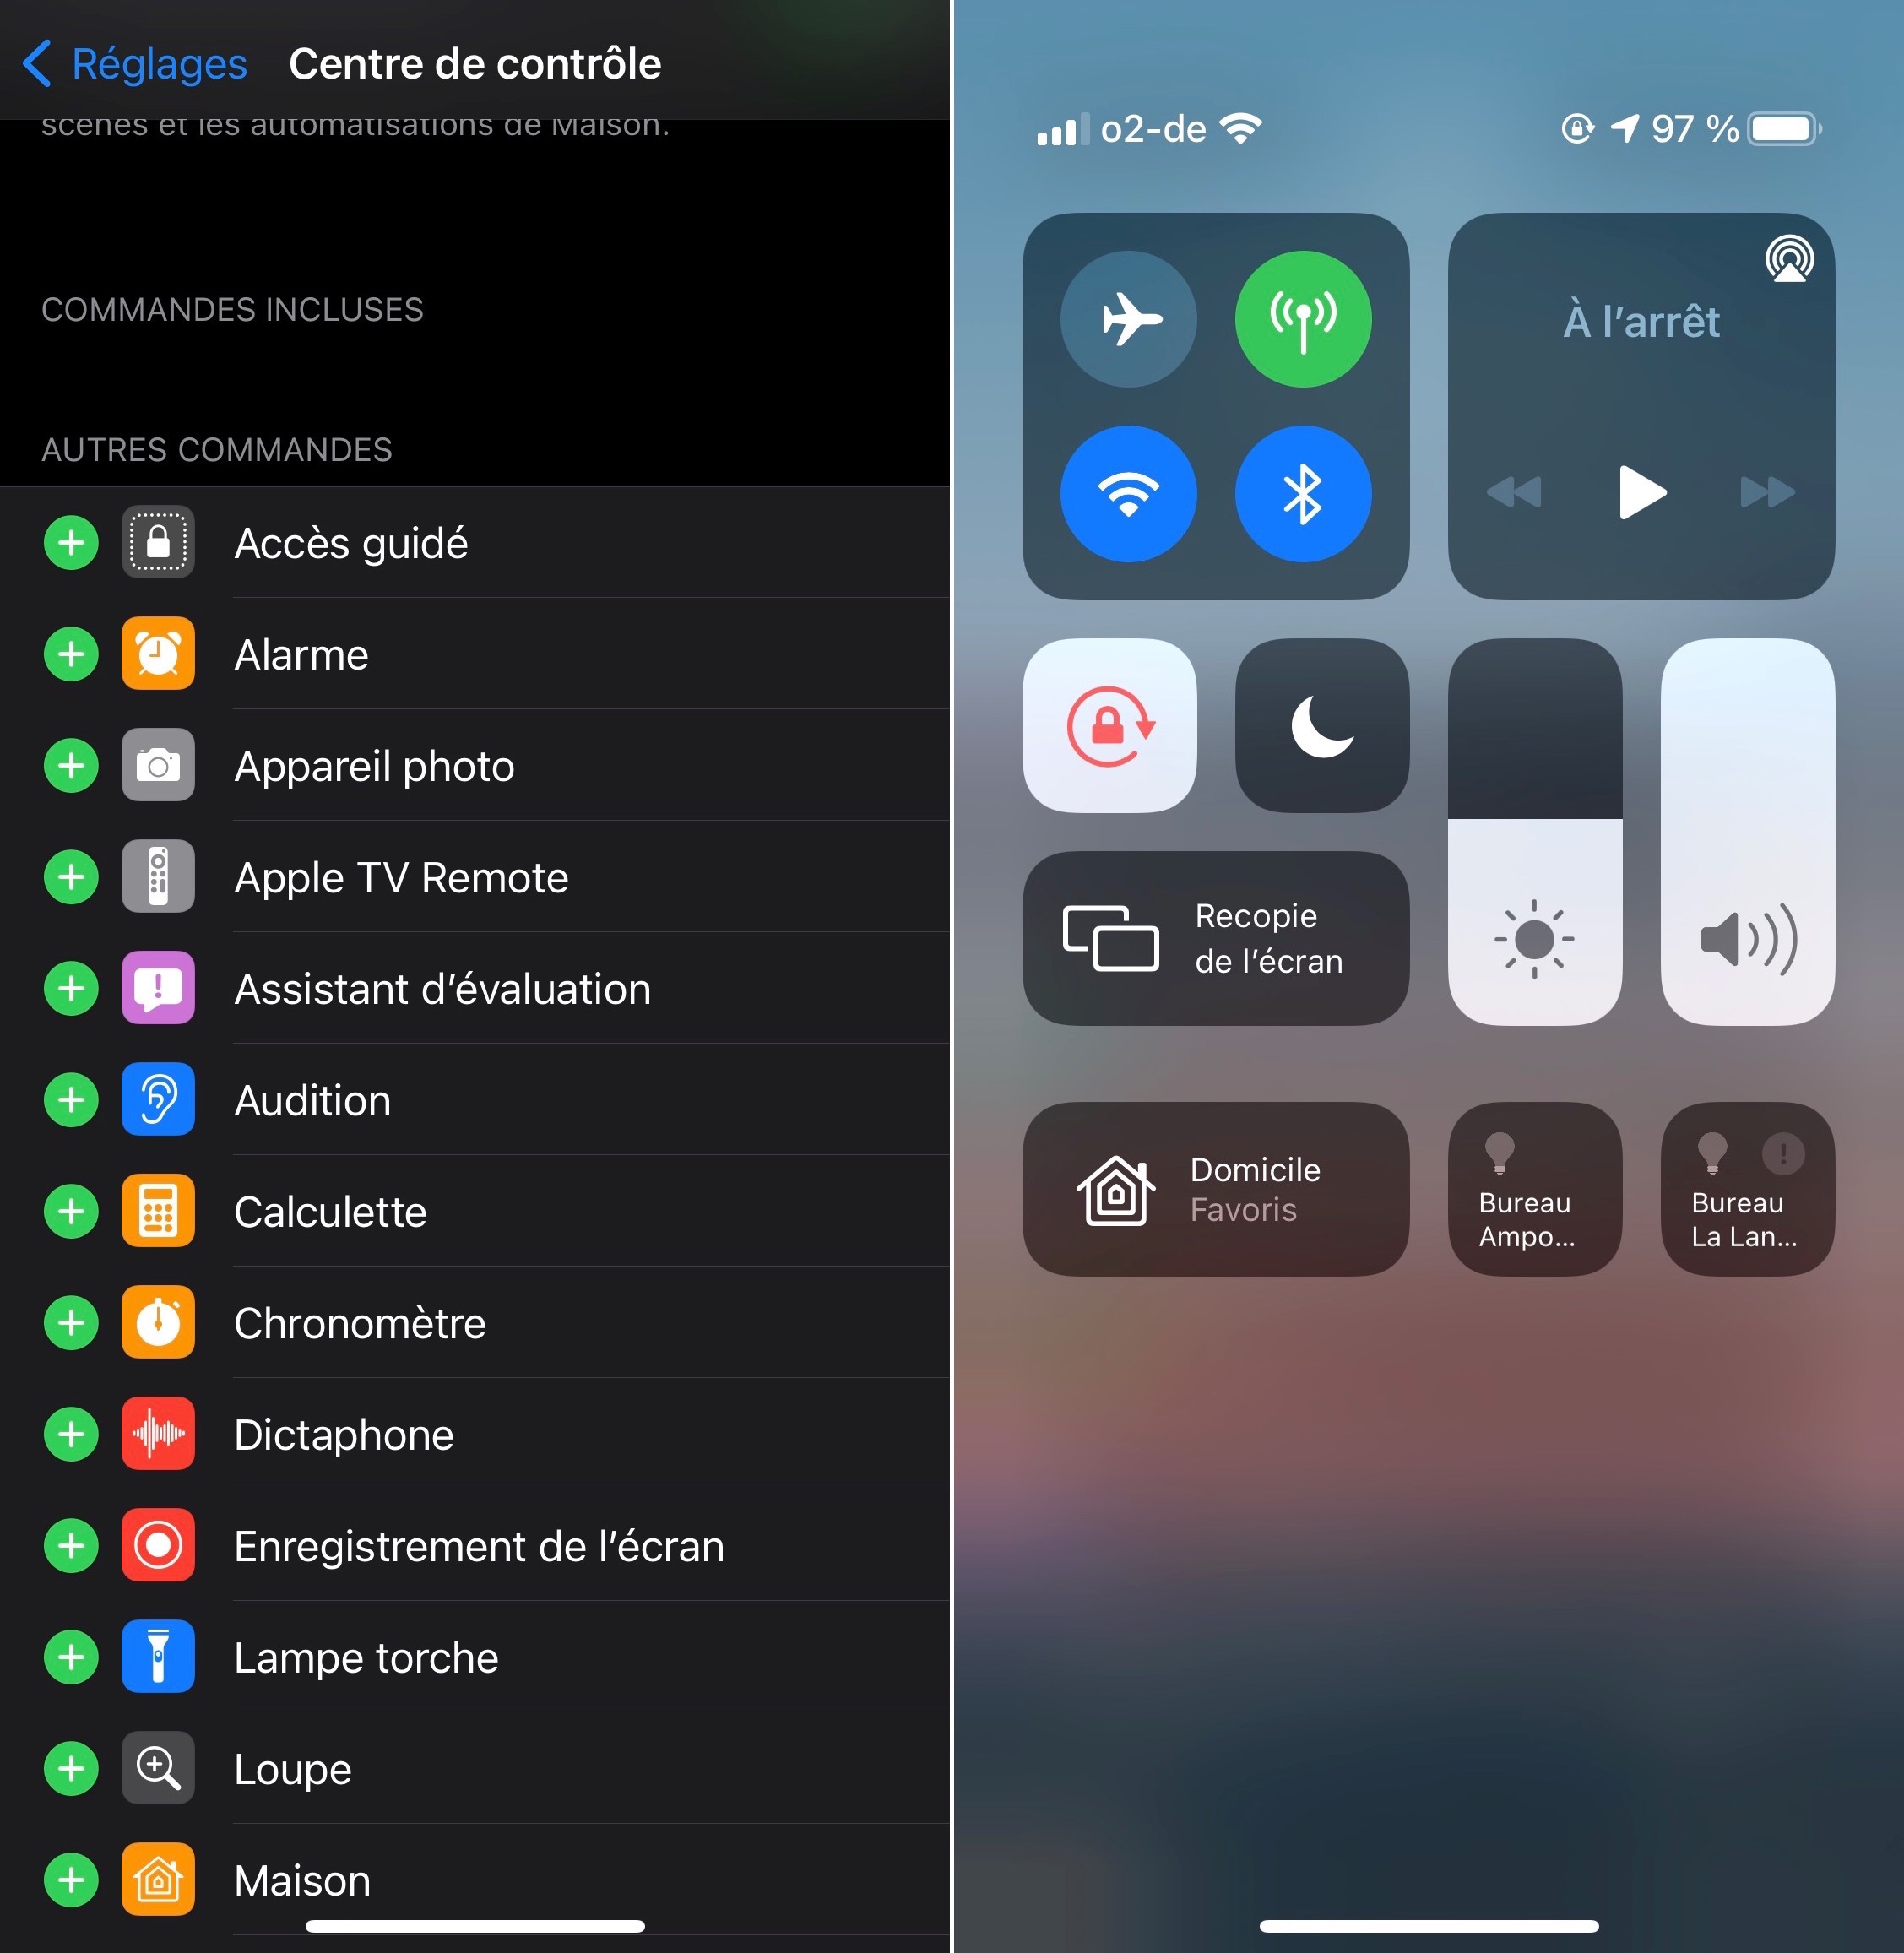 Control center without commands